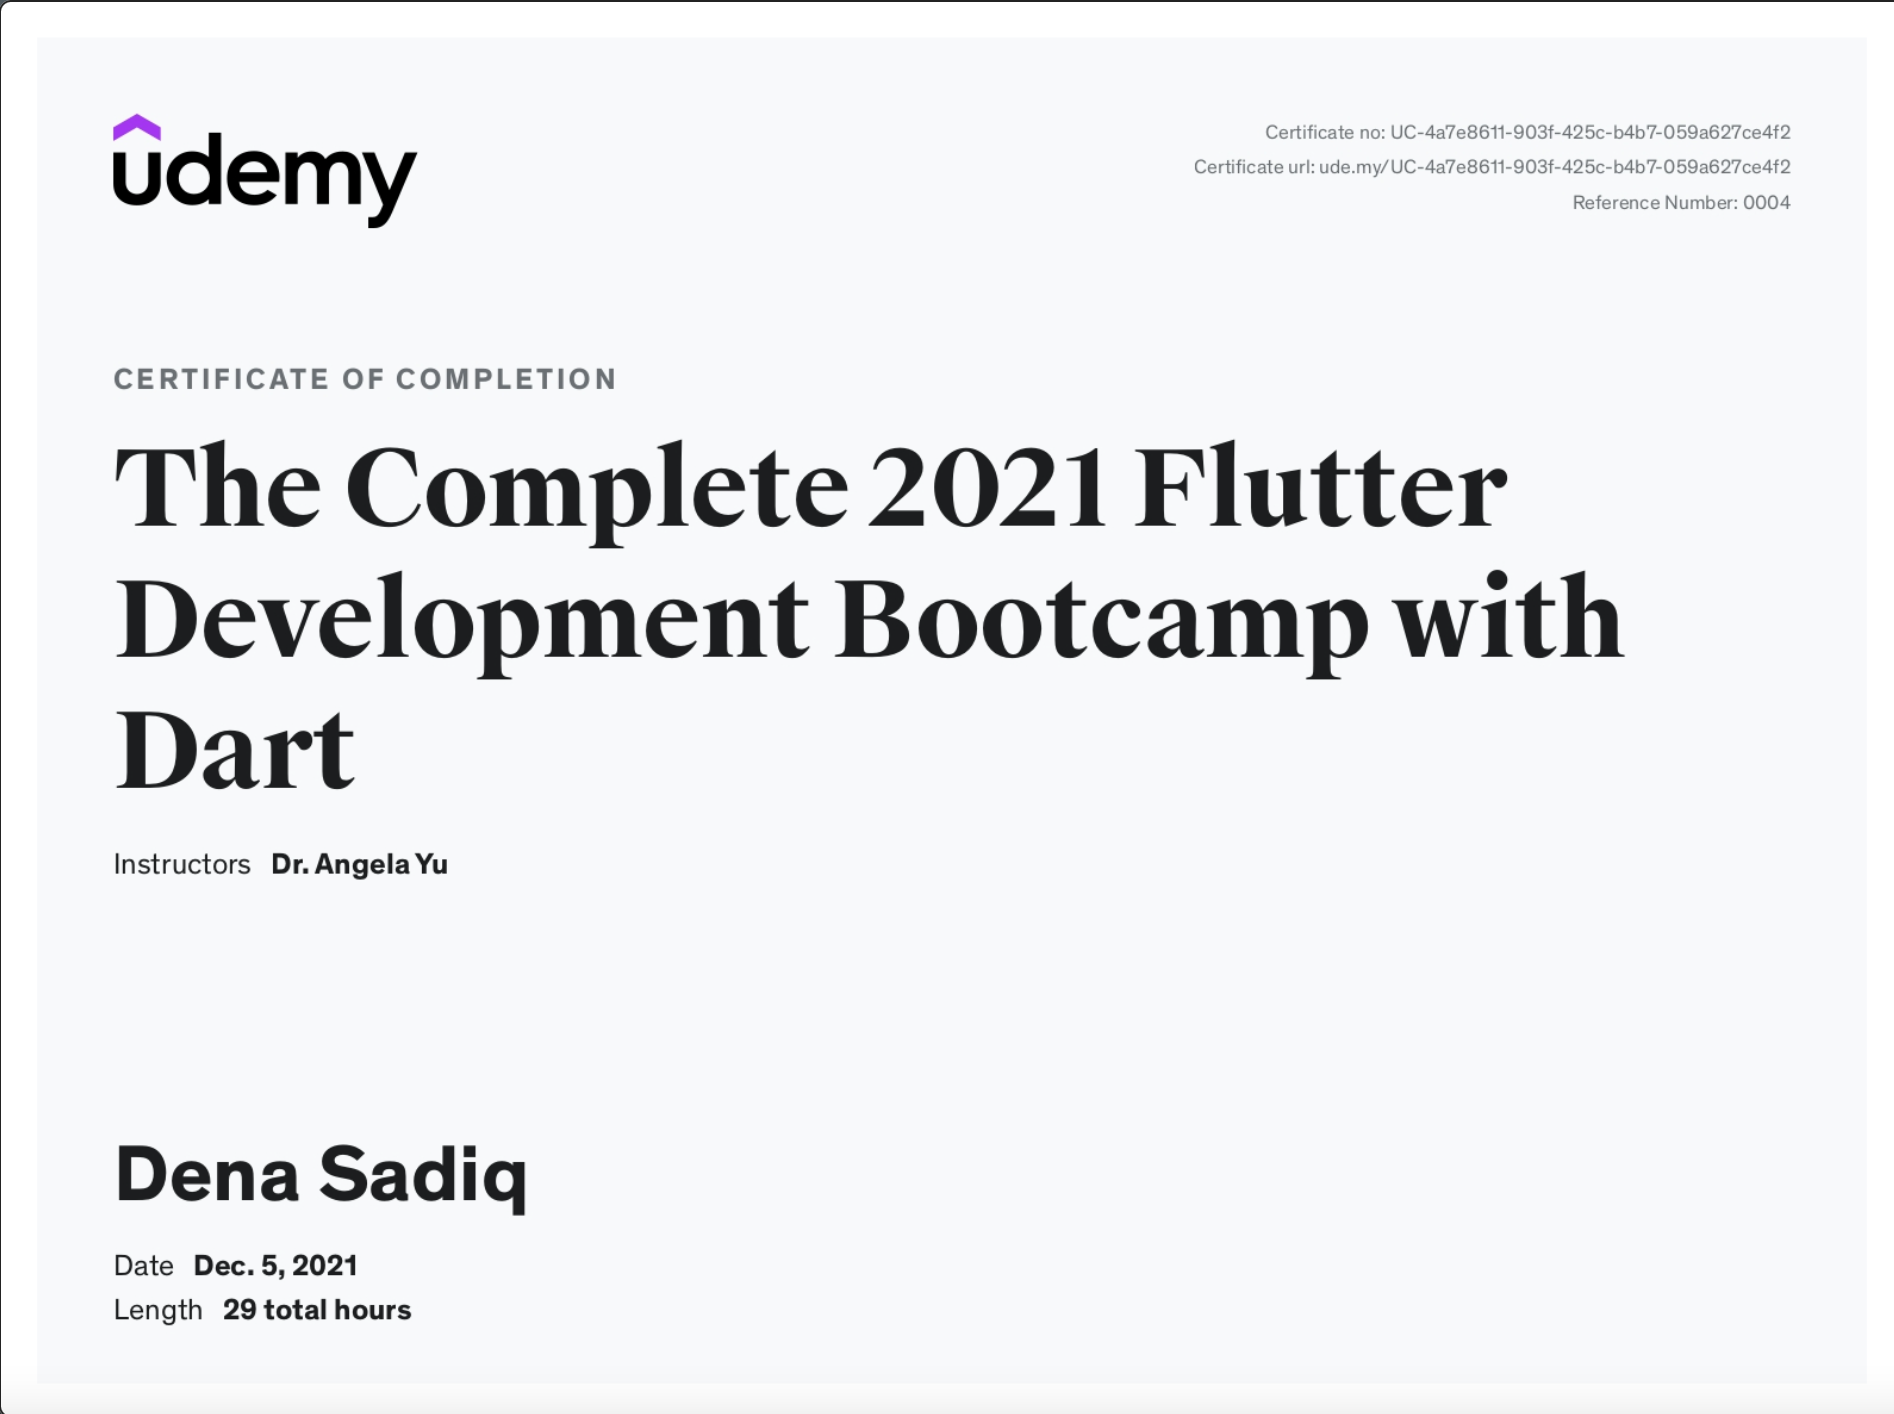 The Complete 2021 Flutter Development Bootcamp with Dart